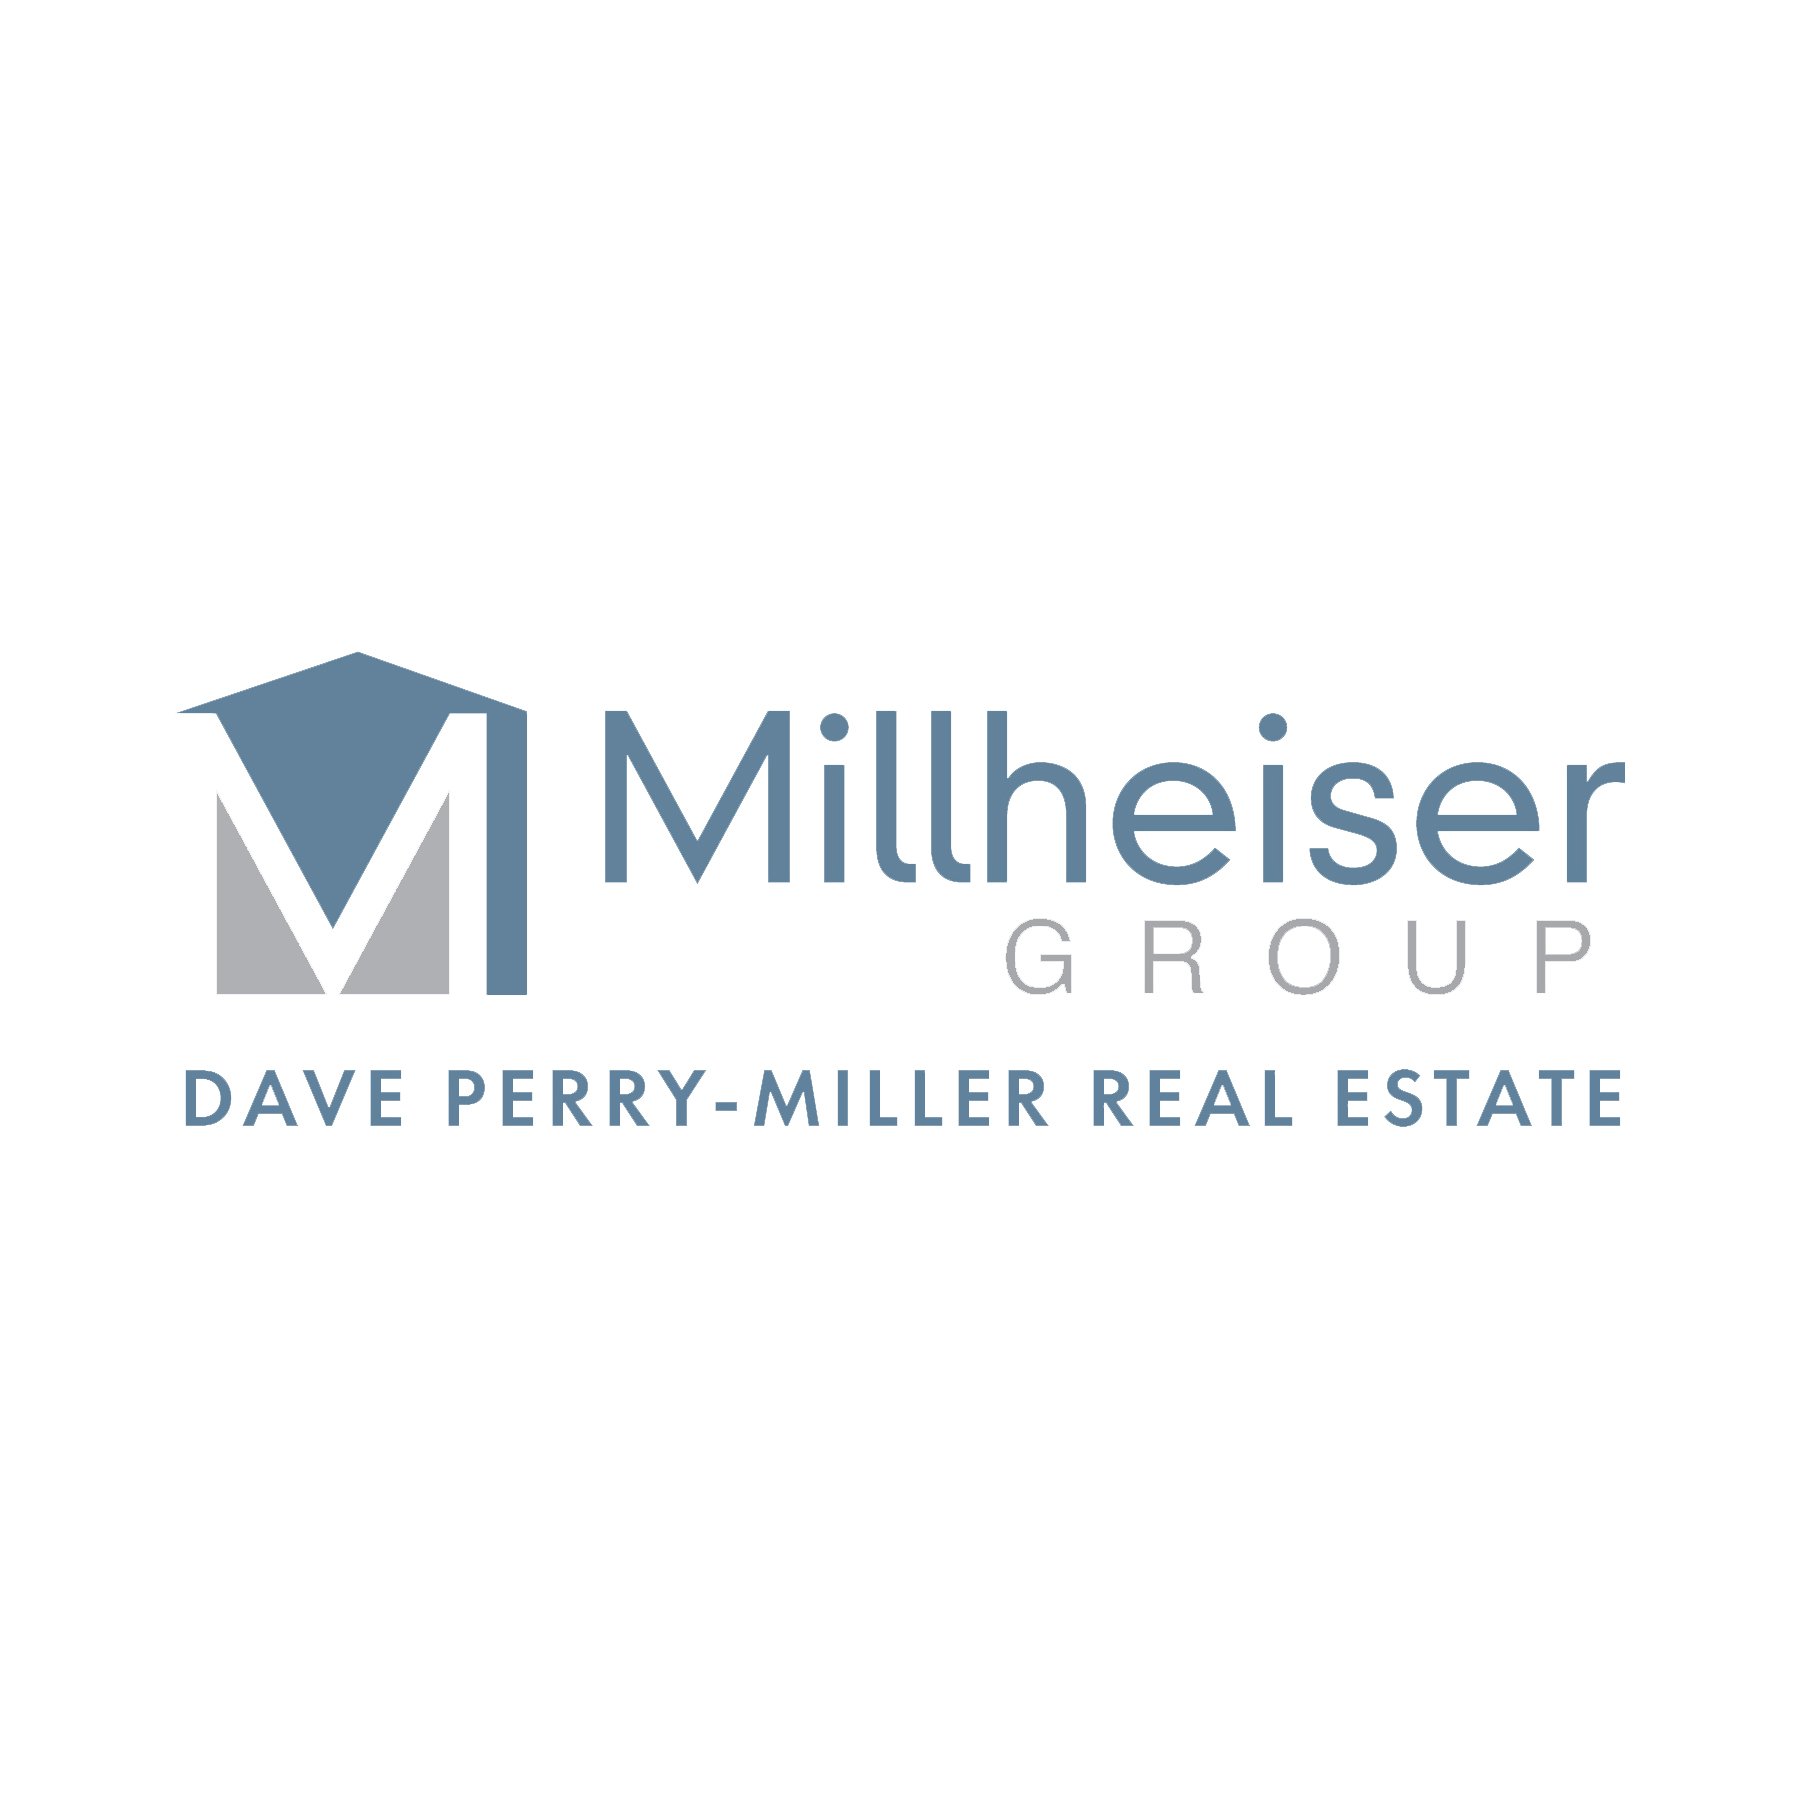 For more than 20 years, the Millheiser group has been making your dream home a reality in the Dallas area.